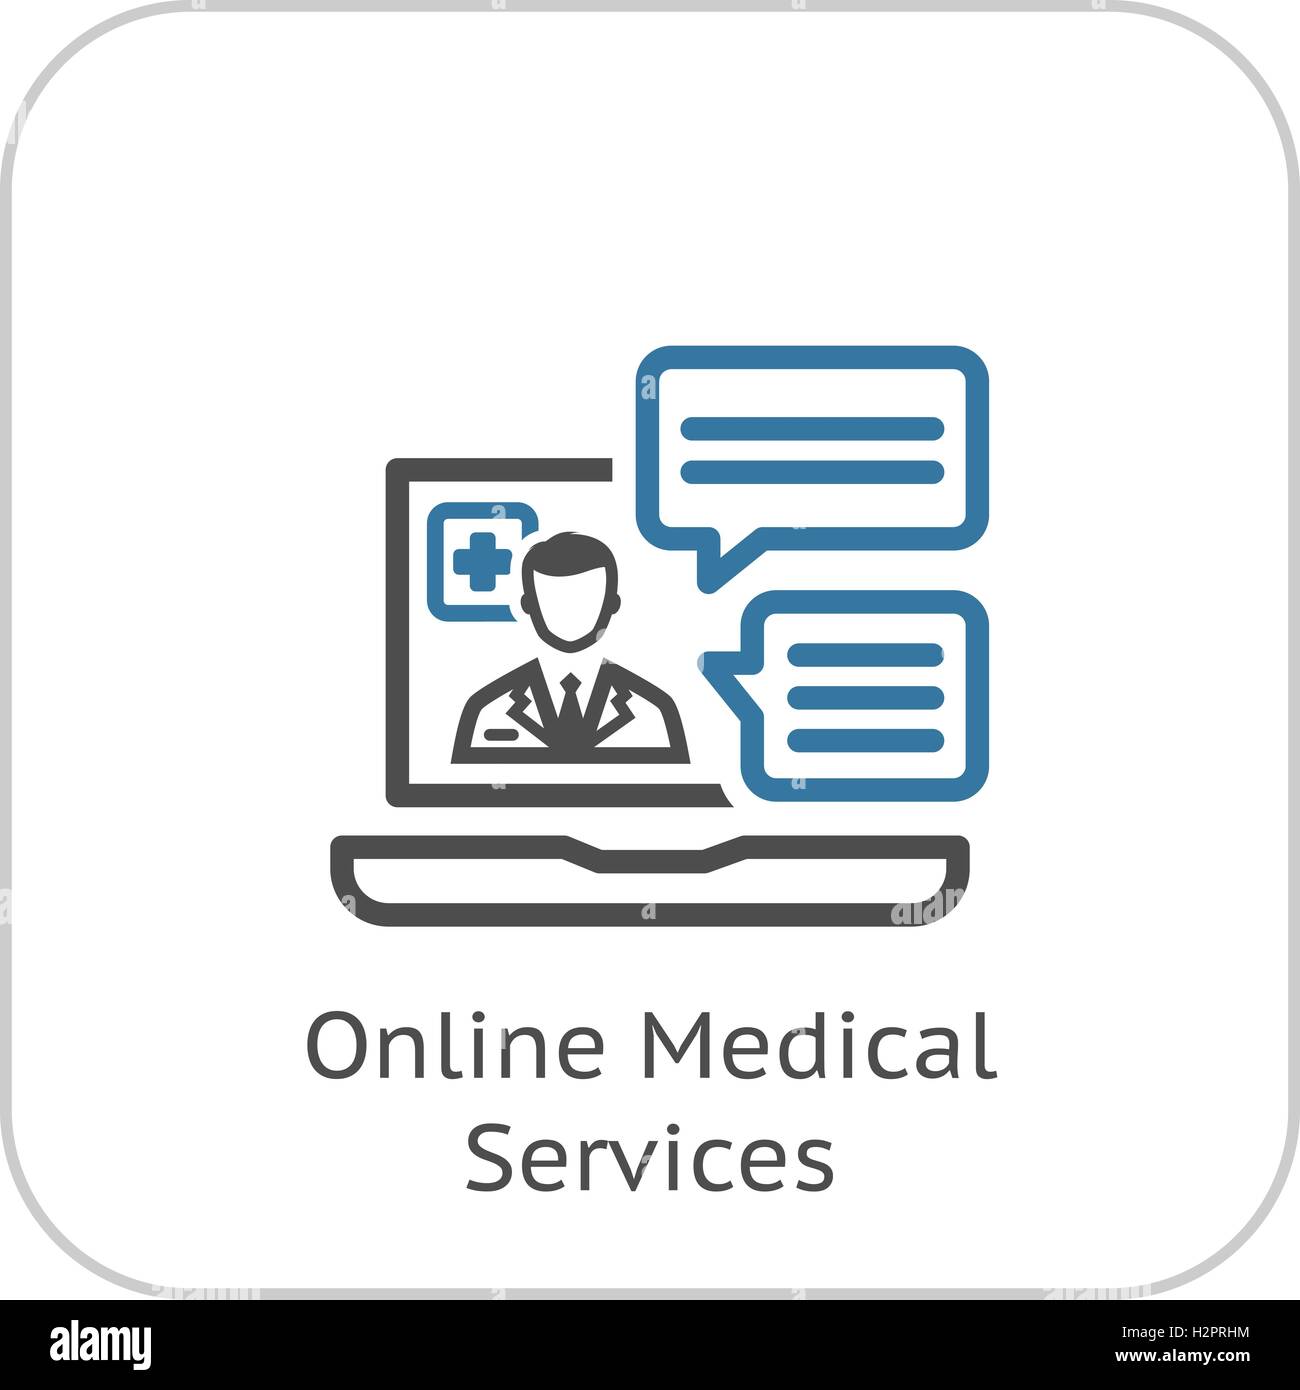 Online Medical Services Icon. Flat Design. Stock Vector